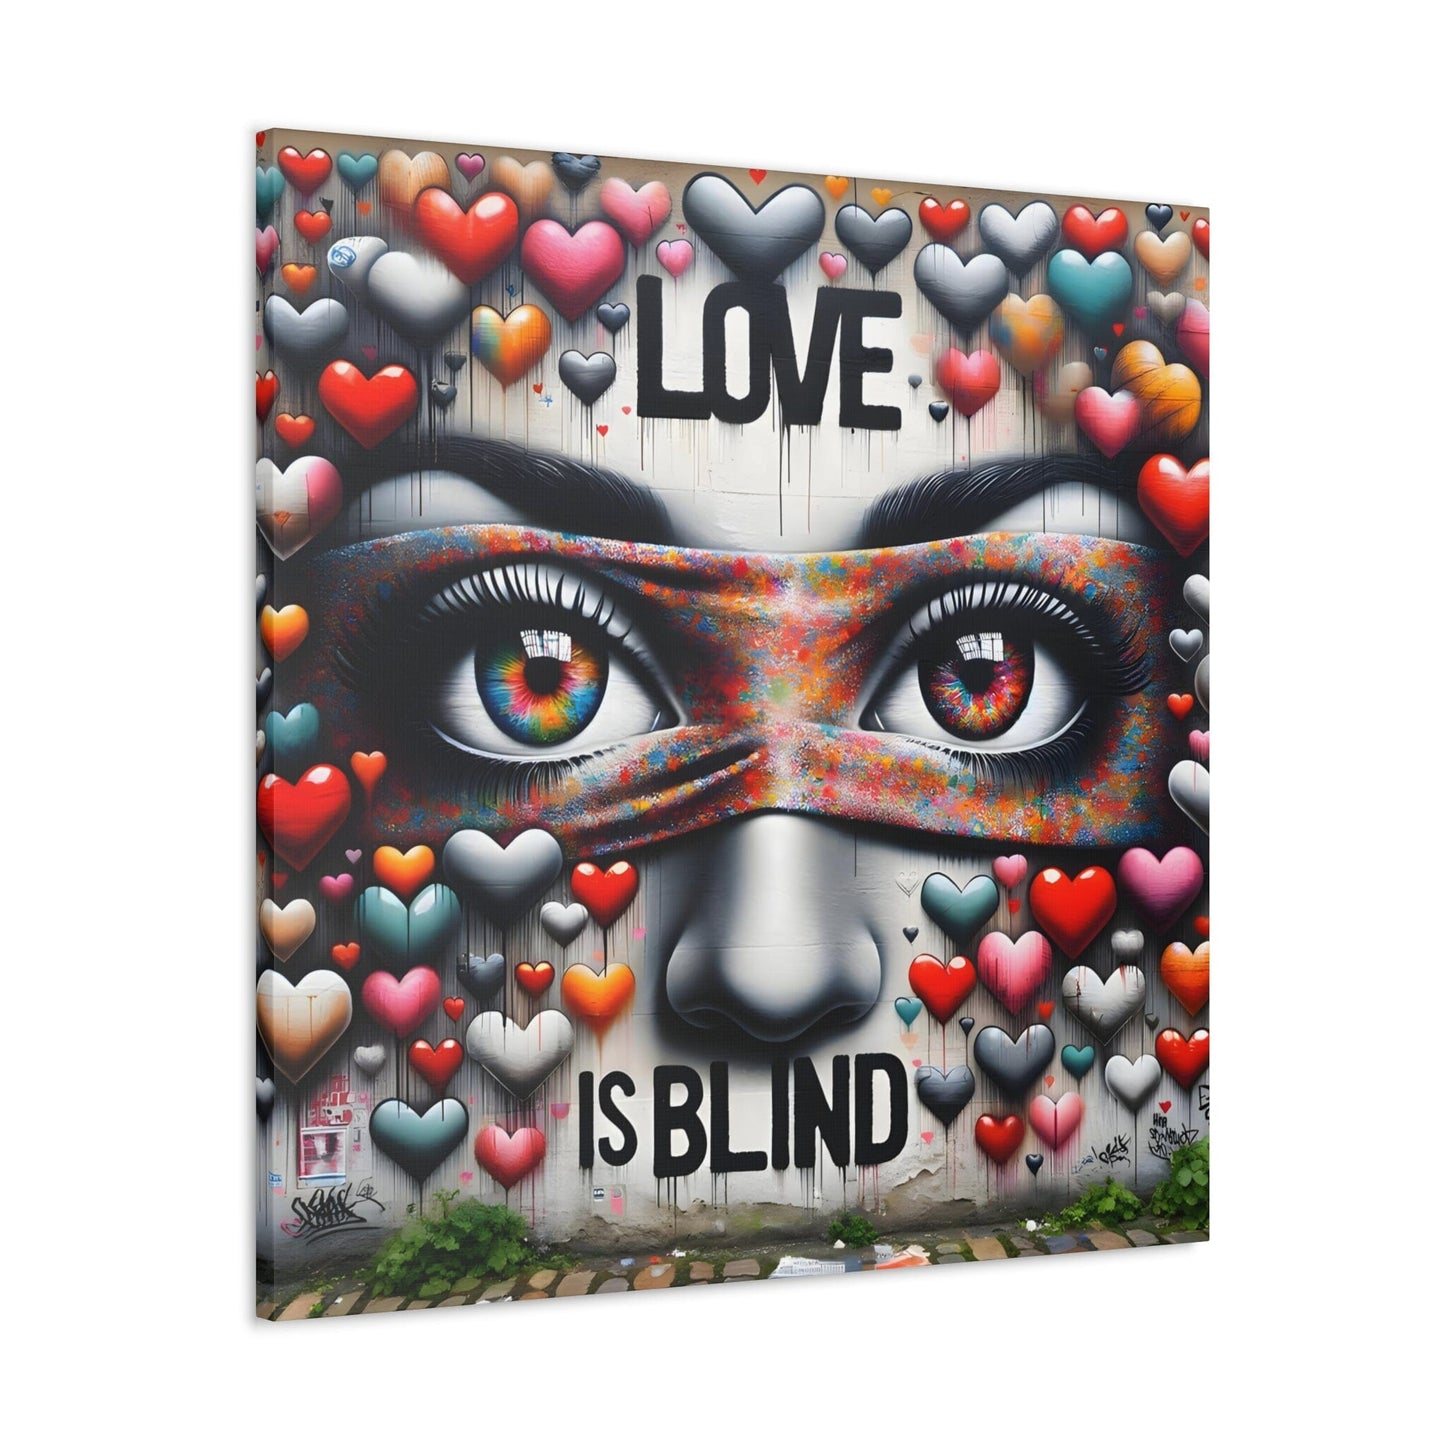 angled shot.Alexi Hartwell. CColors of Unity’ by Alexi Hartwell, featuring faces adorned with pride colors merging on a textured urban canvas, centered around the bold statement ‘Love is Blind’